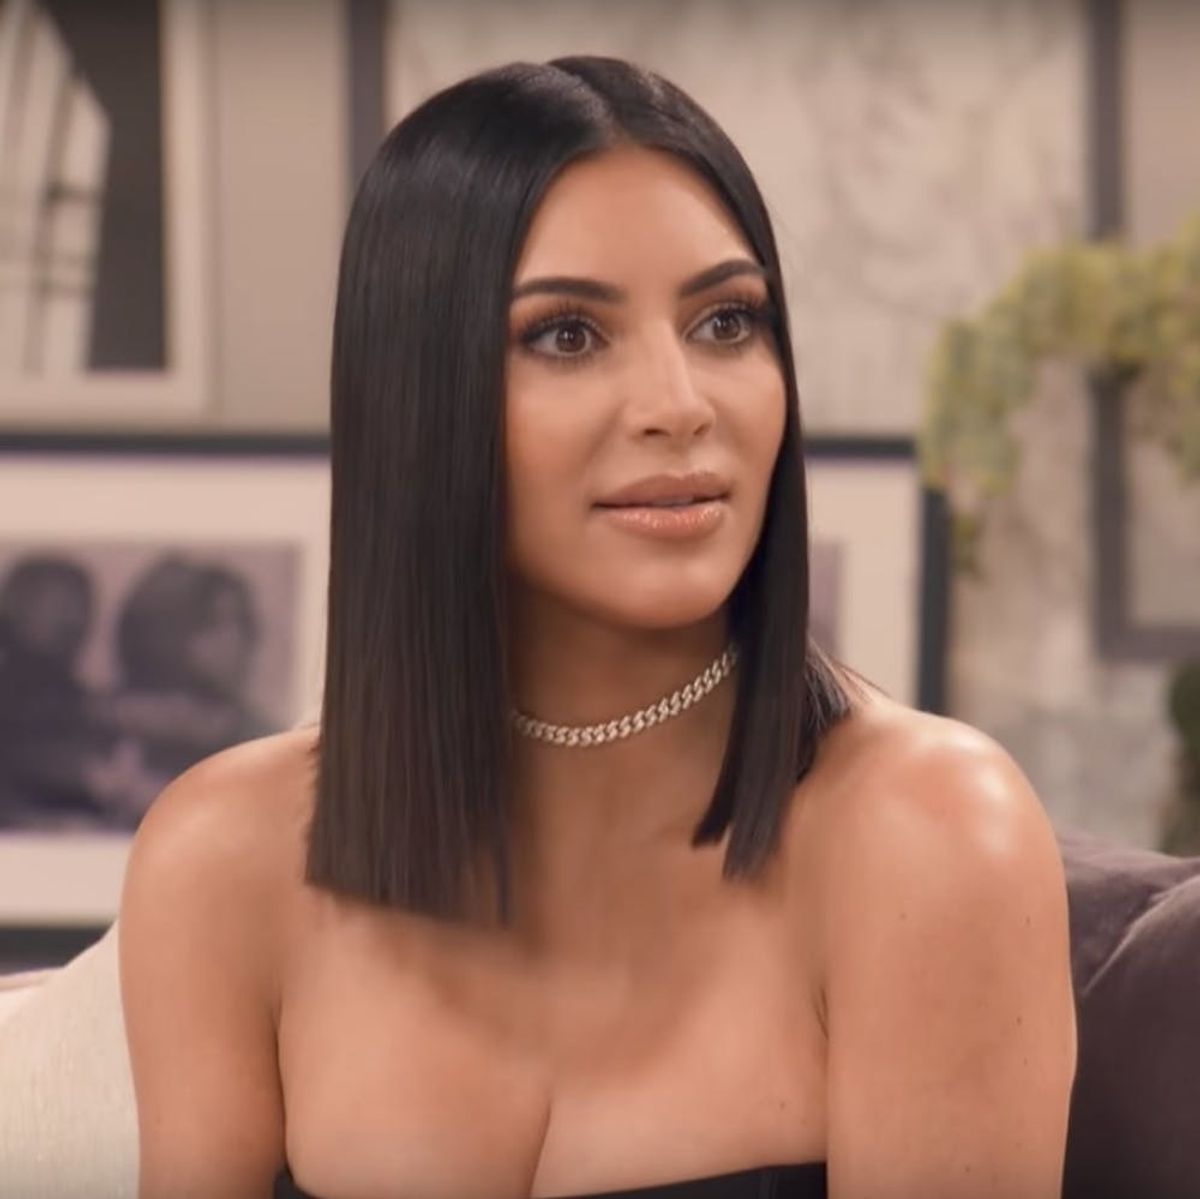 5 Revelations from the “Keeping Up With the Kardashians” Anniversary Special